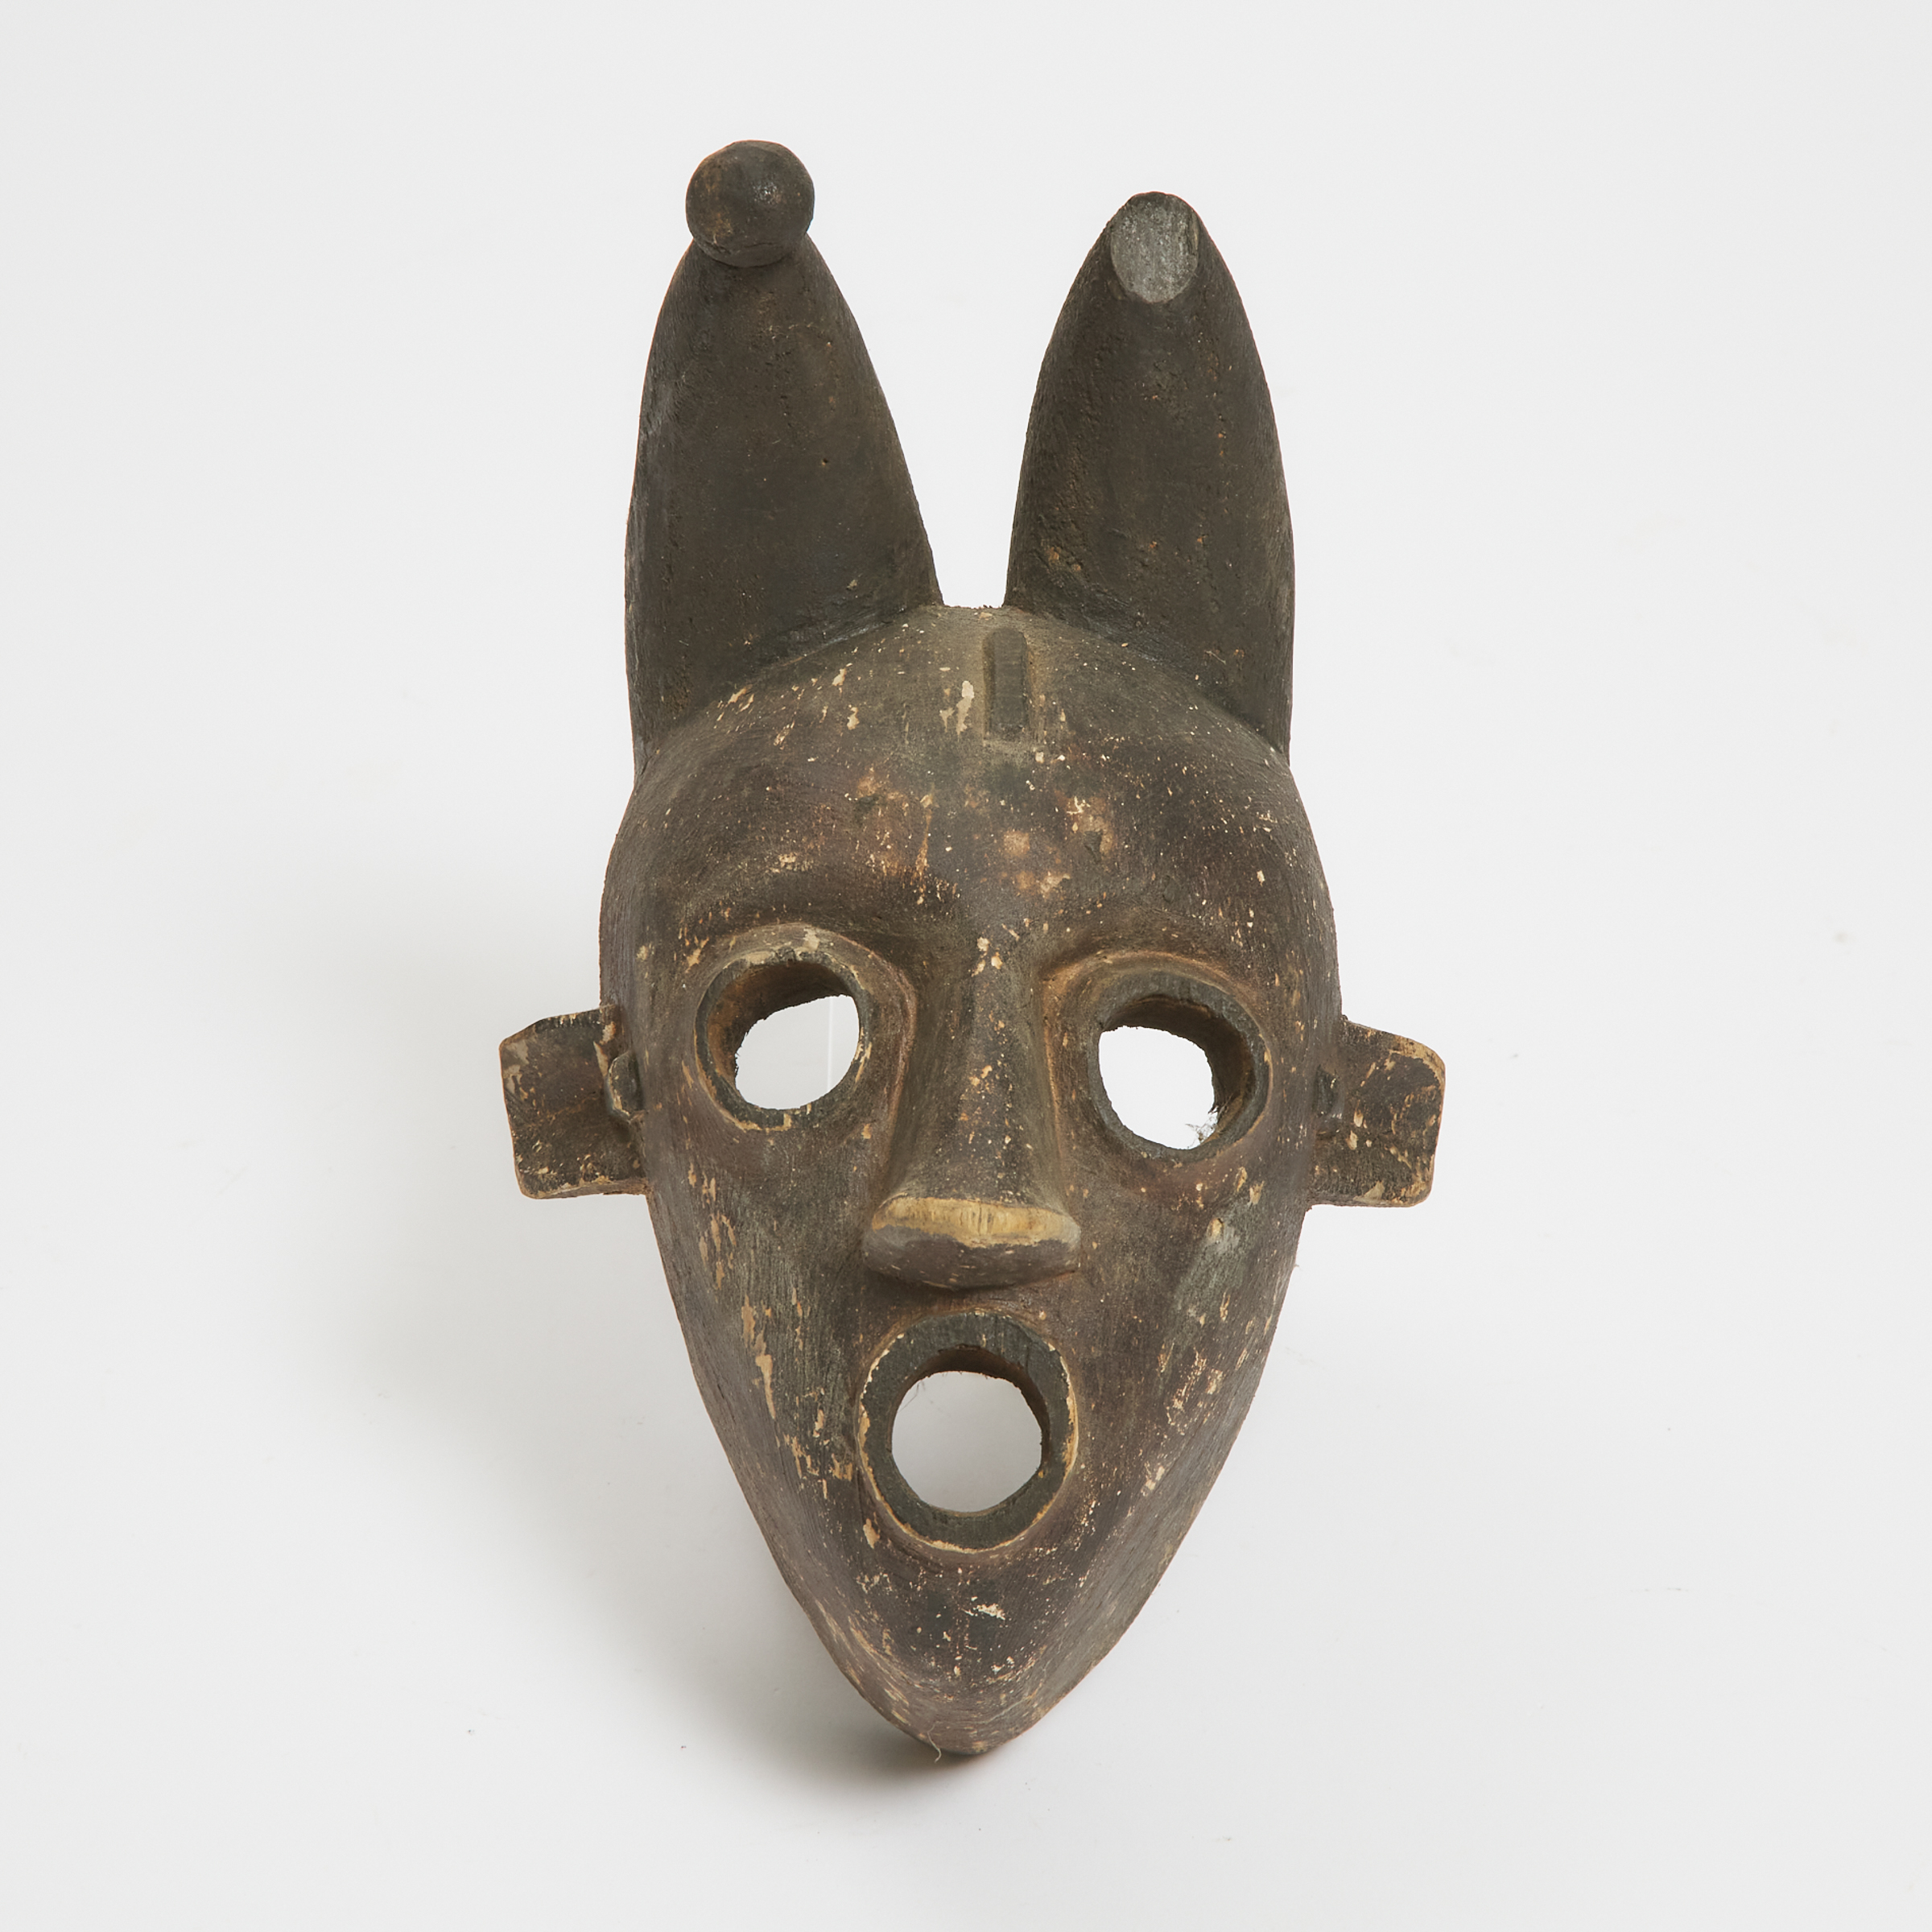 Unidentifed African Mask, Ogoni Style, possibly Nigeria, mid to late 20th century